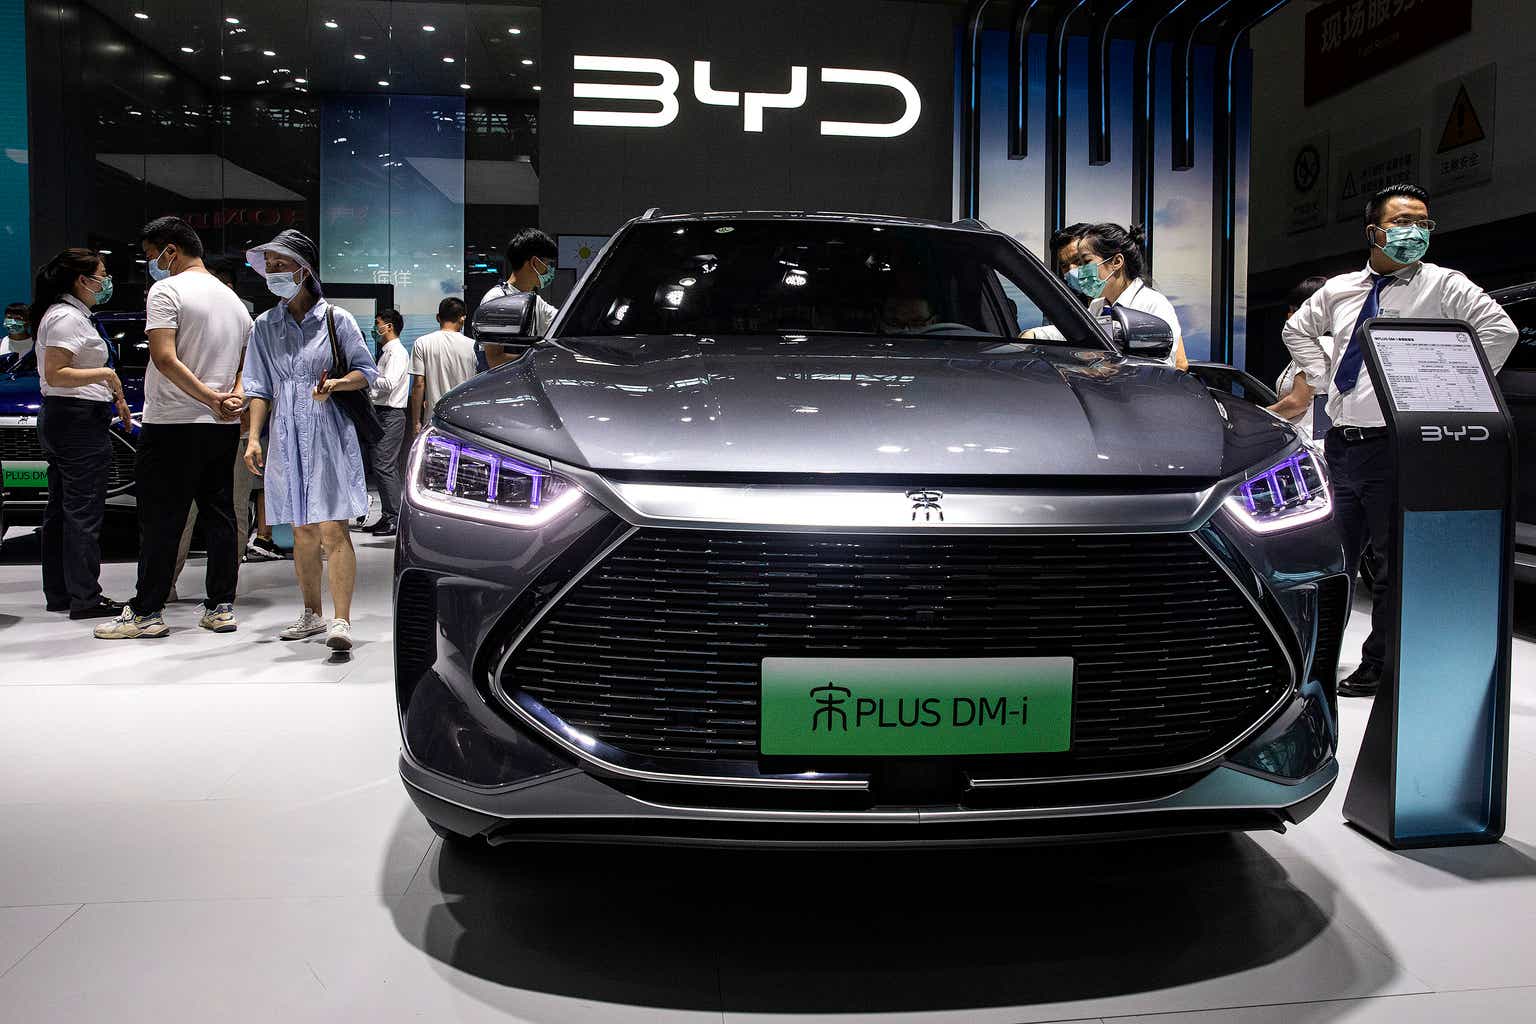 BYD (BYDDY) Stock: Forget Tesla, The Real King Of Chinese EVs